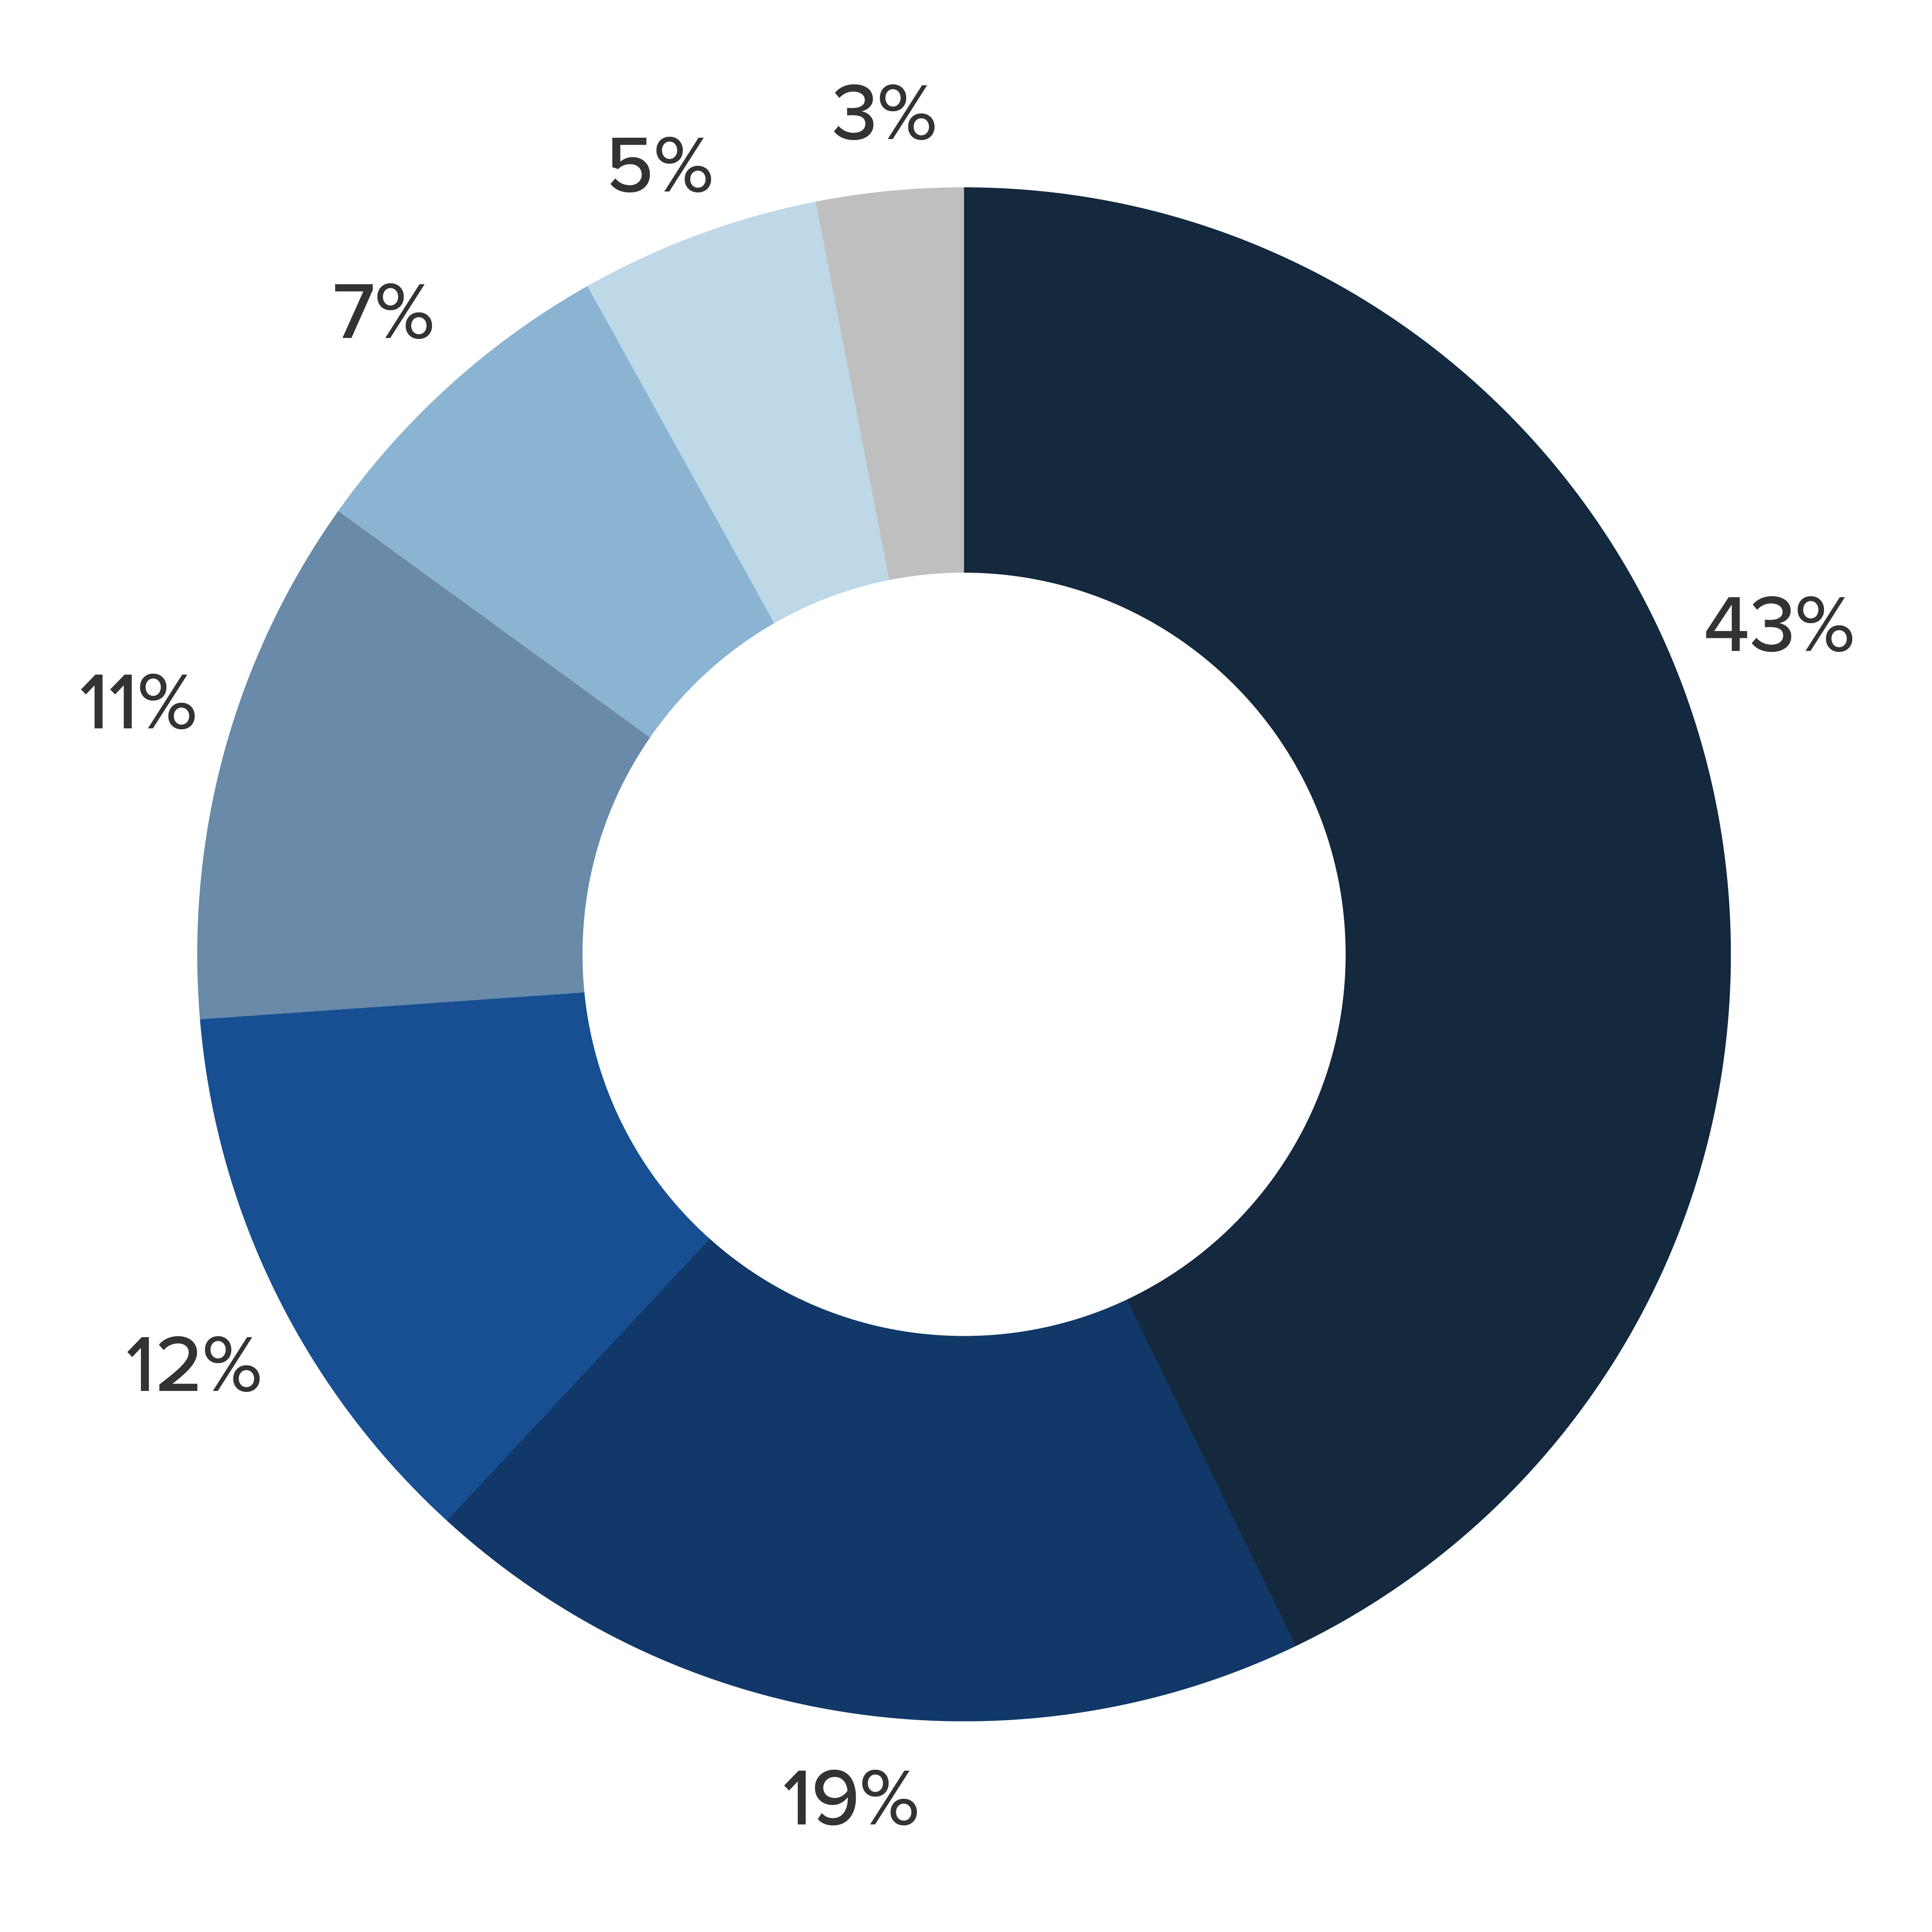 donut diagram showing percentages of global loyalty